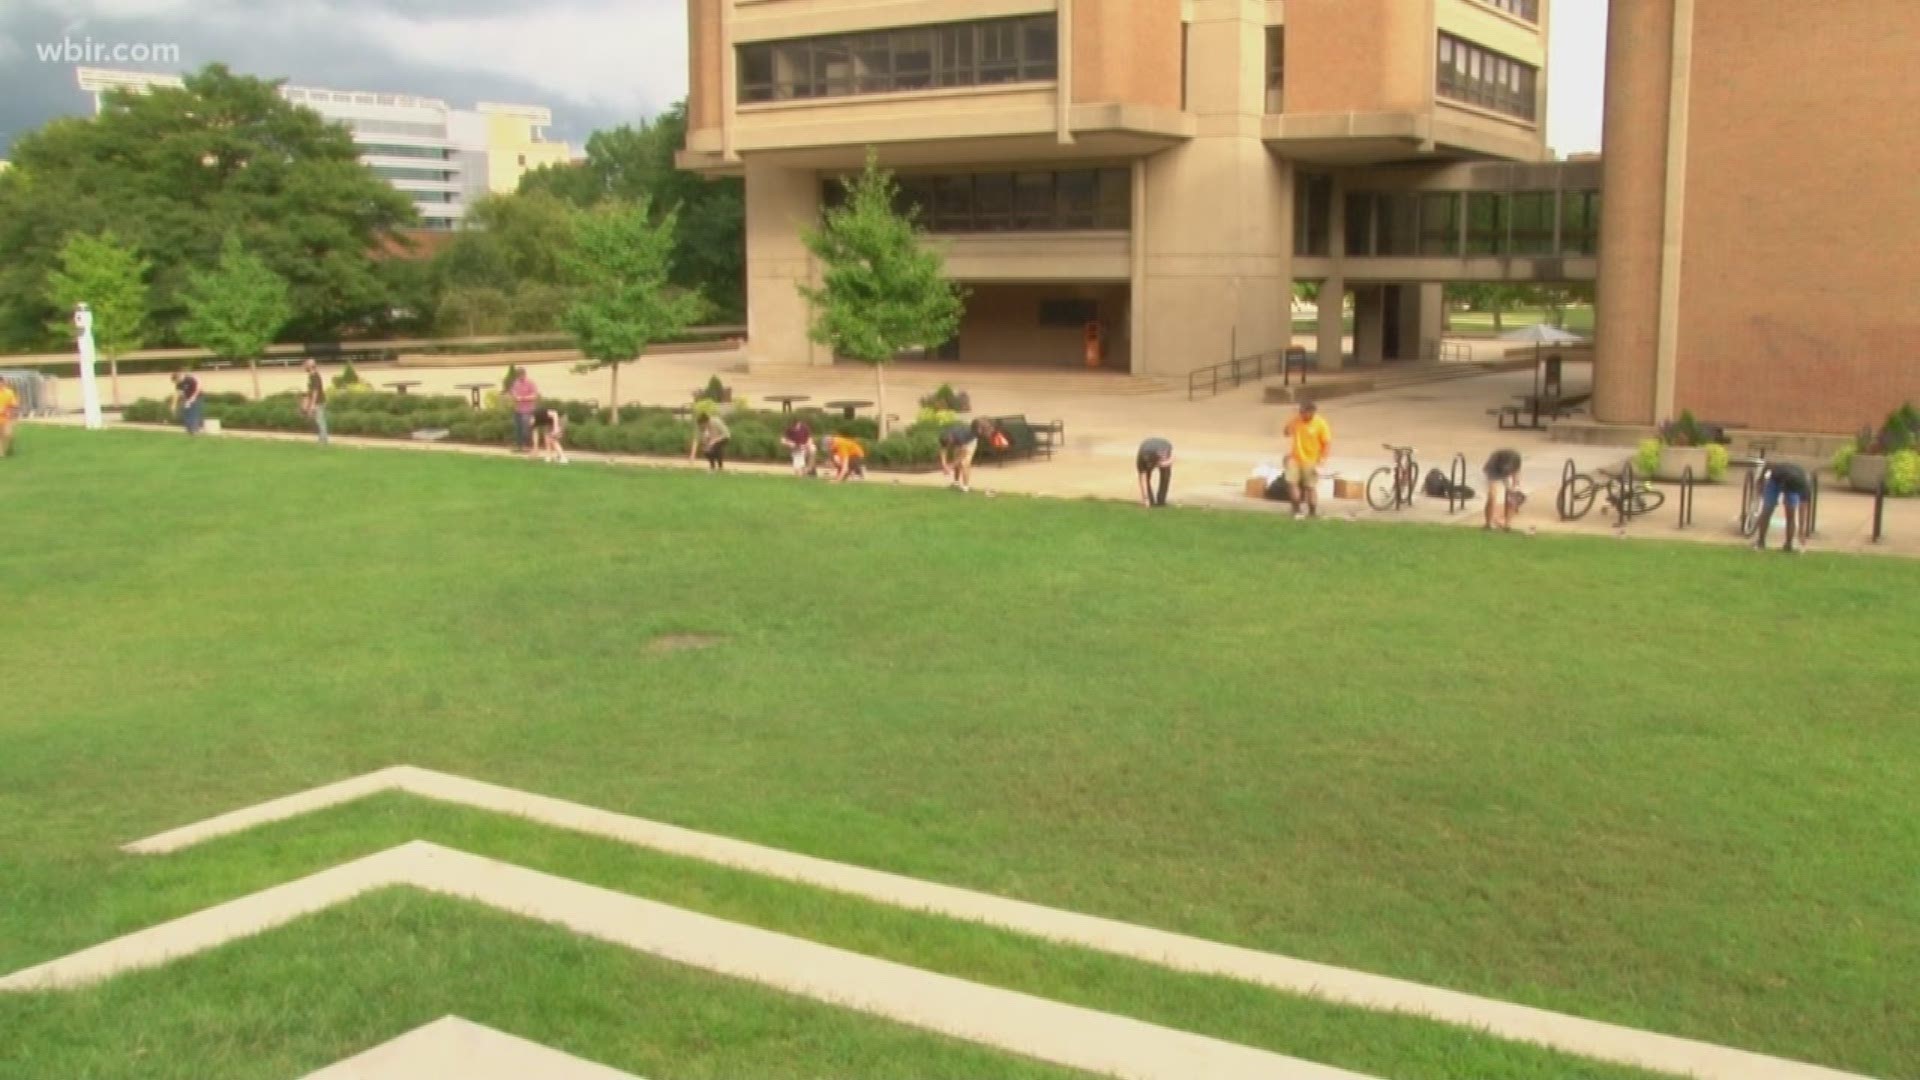 Volunteers on the UT campus placed 2,977 flags for the people who died during those attacks in 2001.